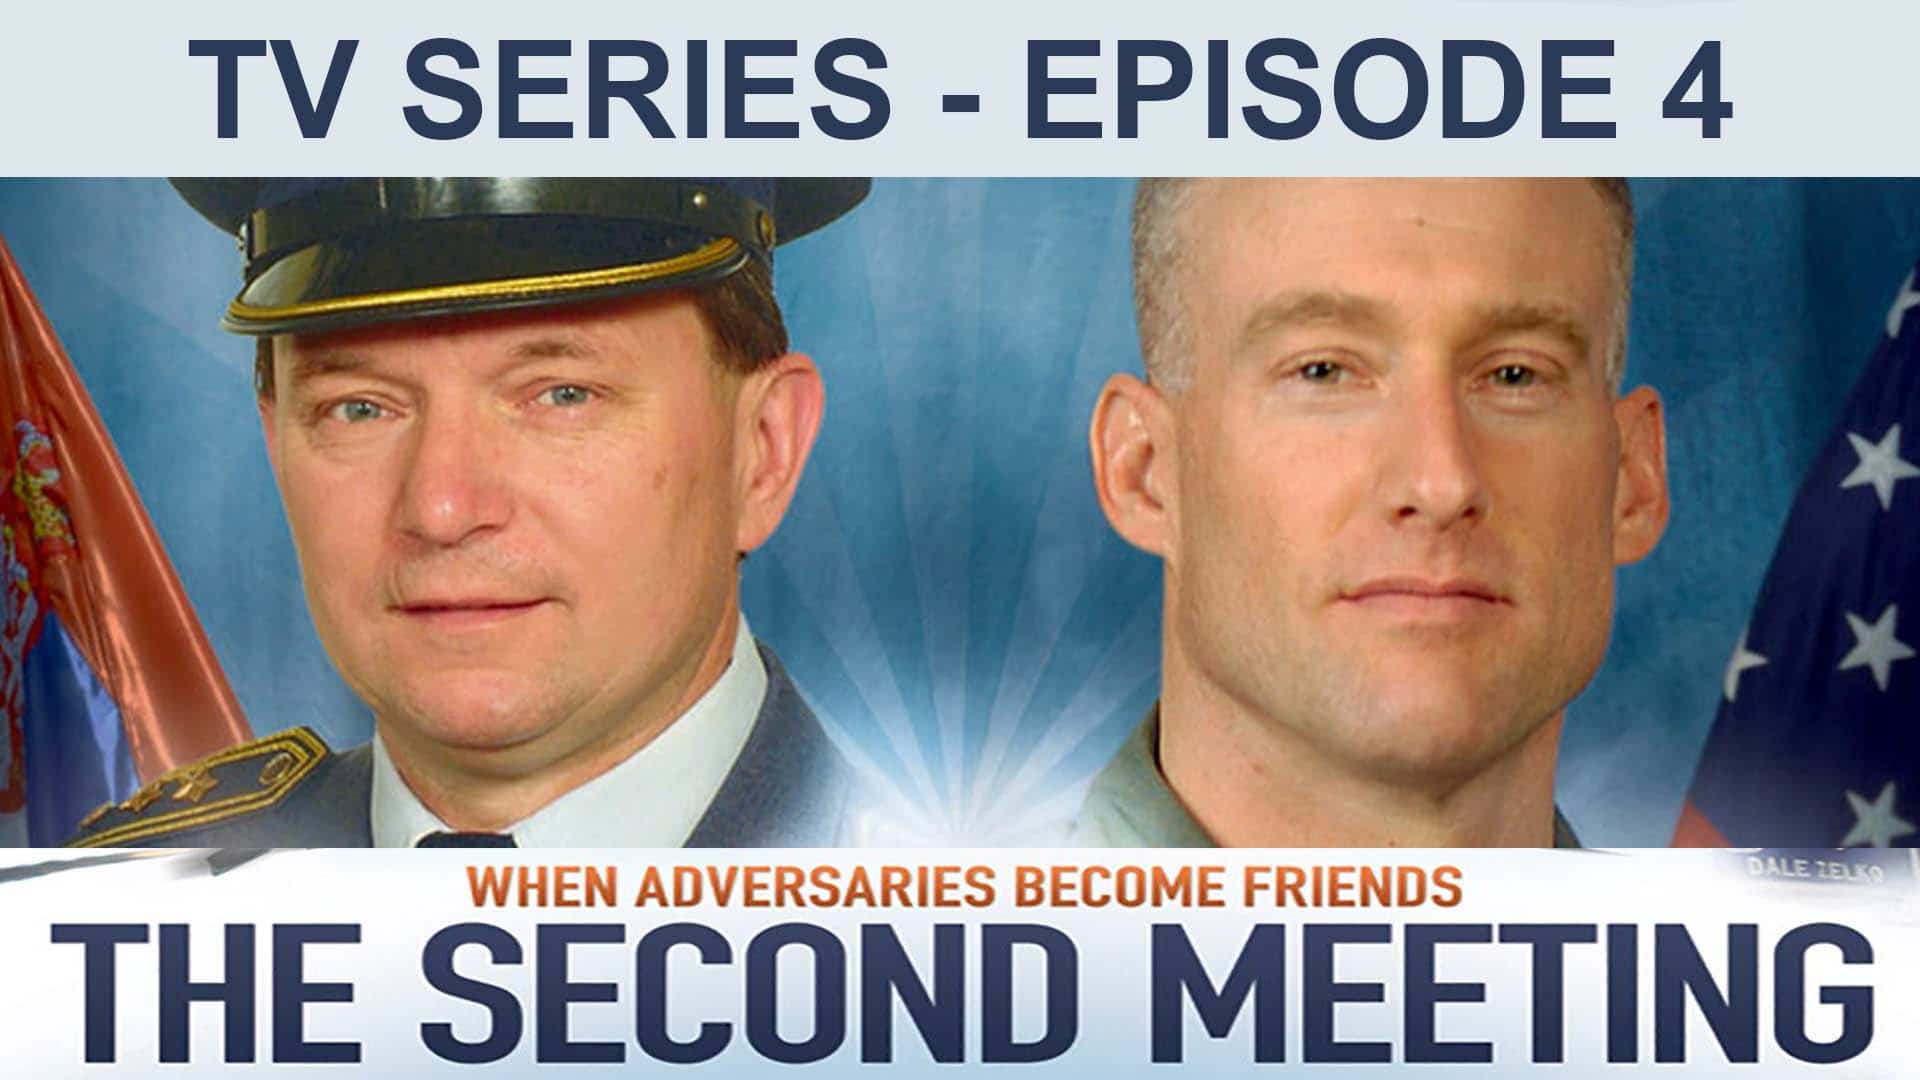 The Second Meeting TV Series Episode 4